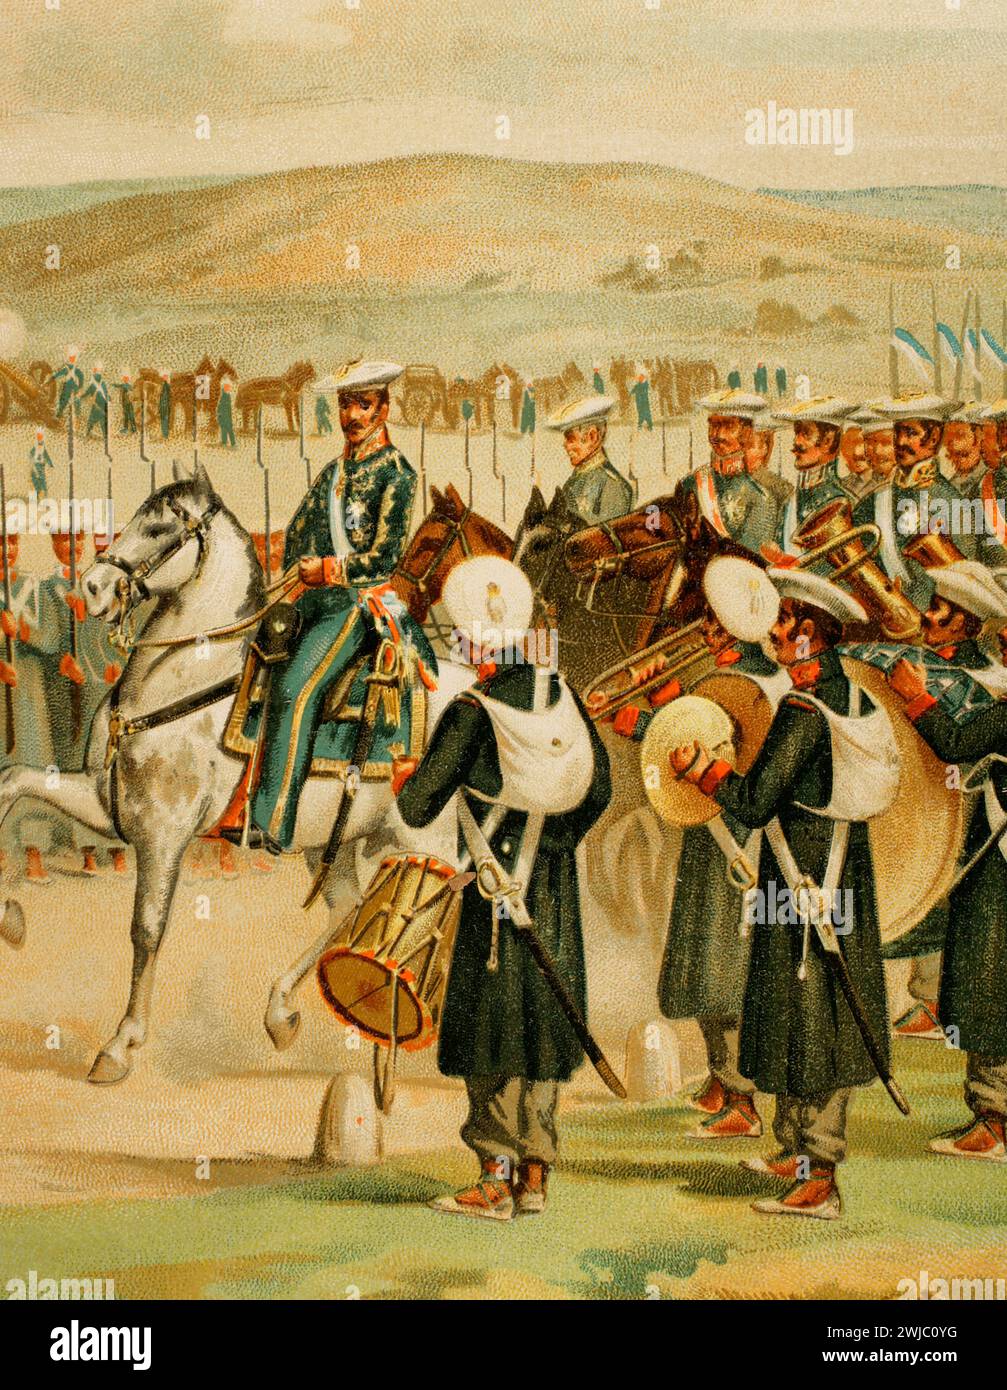 History of Spain. Carlos María Isidro de Borbón (1788-1855), known as Don Carlos. Infante of Spain, the first Carlist pretender to the Spanish throne as Carlos V. First Carlist War (1833-1840). Don Carlos reviewing his troops in Amurrio (Alava). The review took place on 1 December 1837, forming a division composed of thirteen battalions of five hundred soldiers each, along the camino real (royal road) to Bilbao. Don Carlos was accompanied by the Infante Don Sebastián. Illustration by J. Alaminos. Chromolithography. Detail. 'Historia de la Guerra Civil y de los Partidos Liberal y Carlista' (His Stock Photo